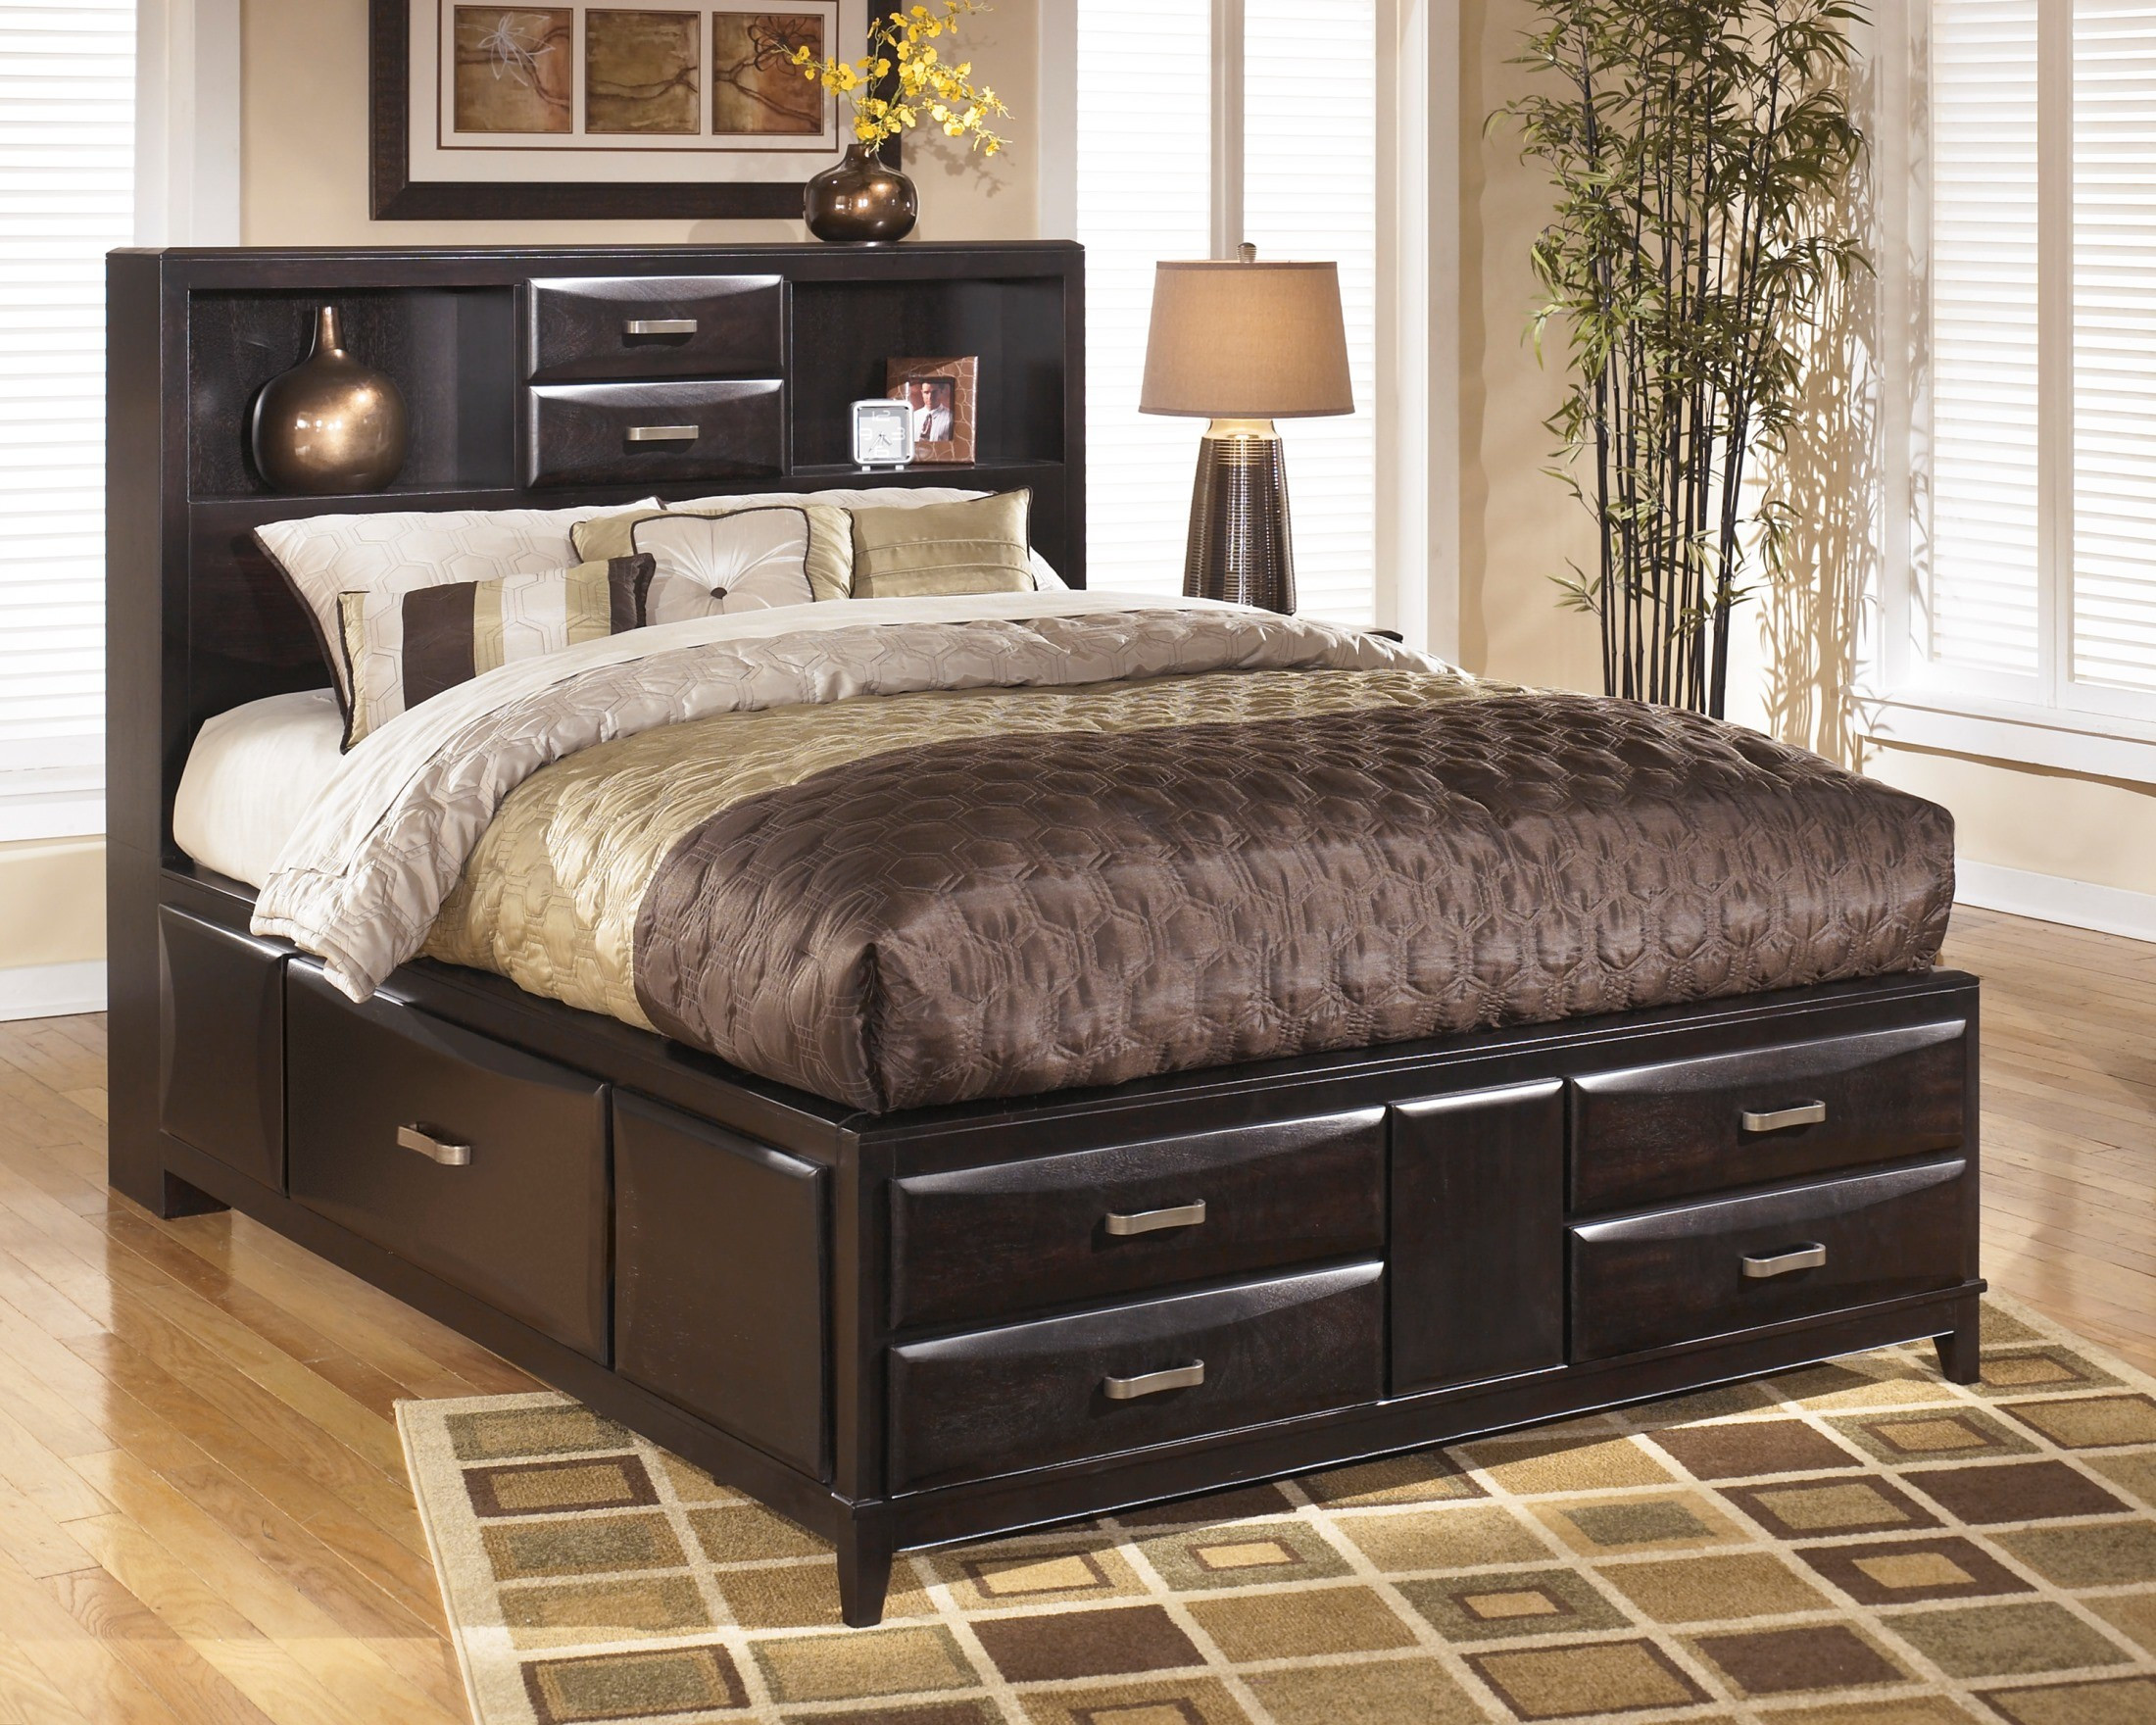 Queen Bedroom Sets With Storage
 Kira Queen Storage Platform Bed from Ashley B473 64 65 98